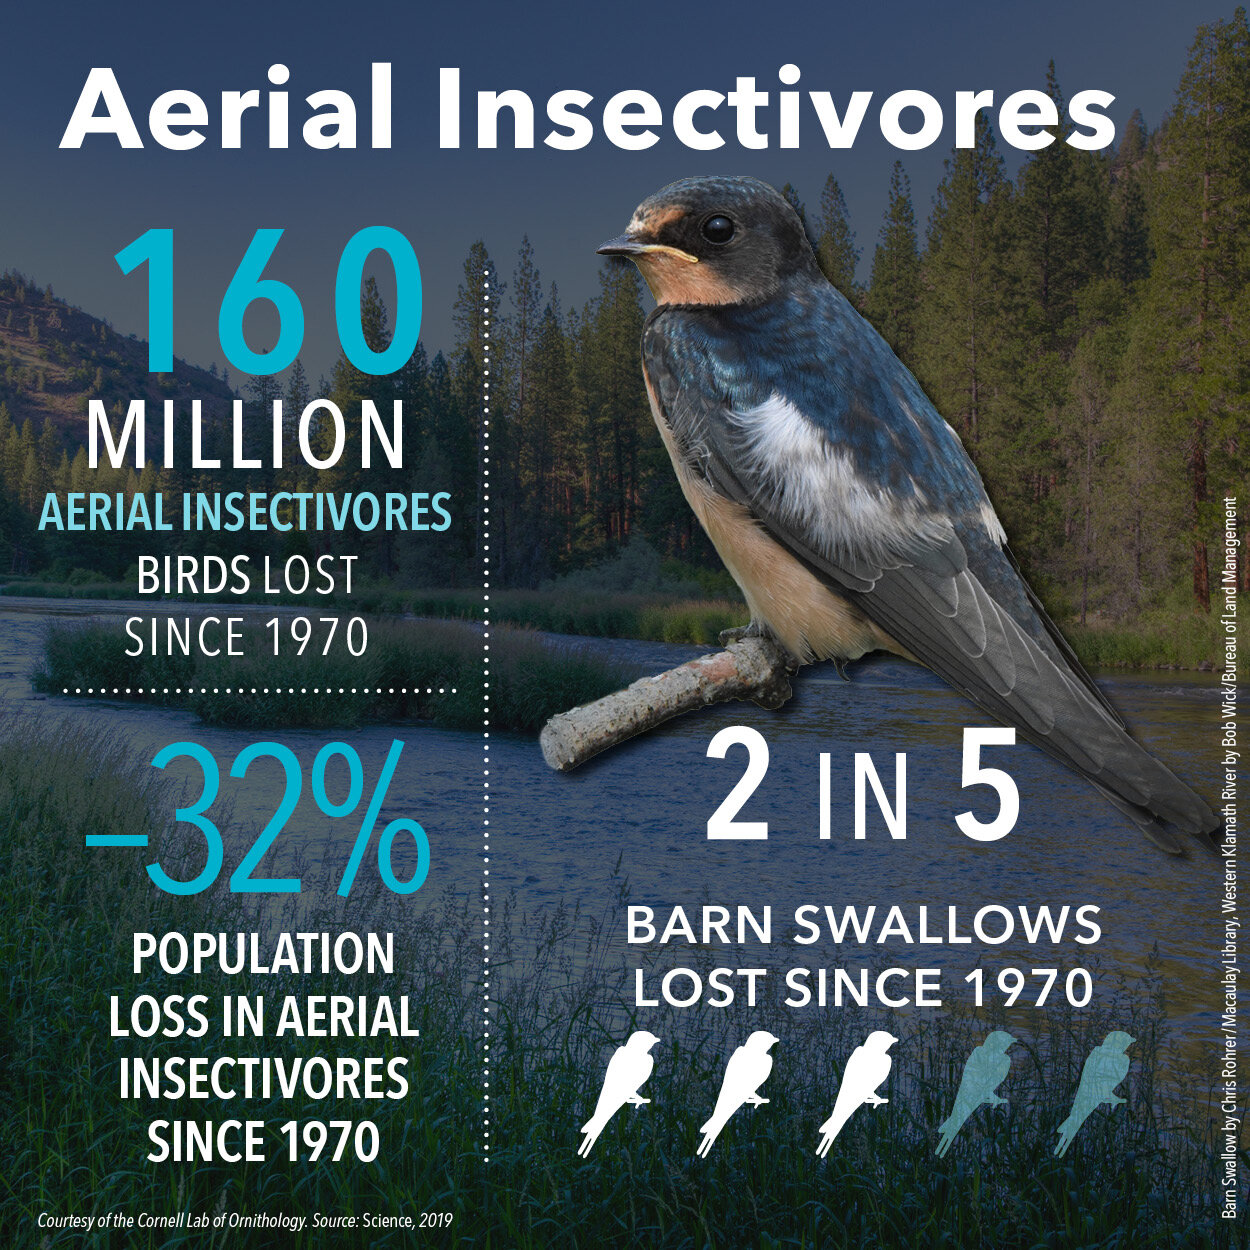 Aerial Insectivores Decrease Infographic (square format) Courtesy of Cornell Lab of Ornithology.jpg